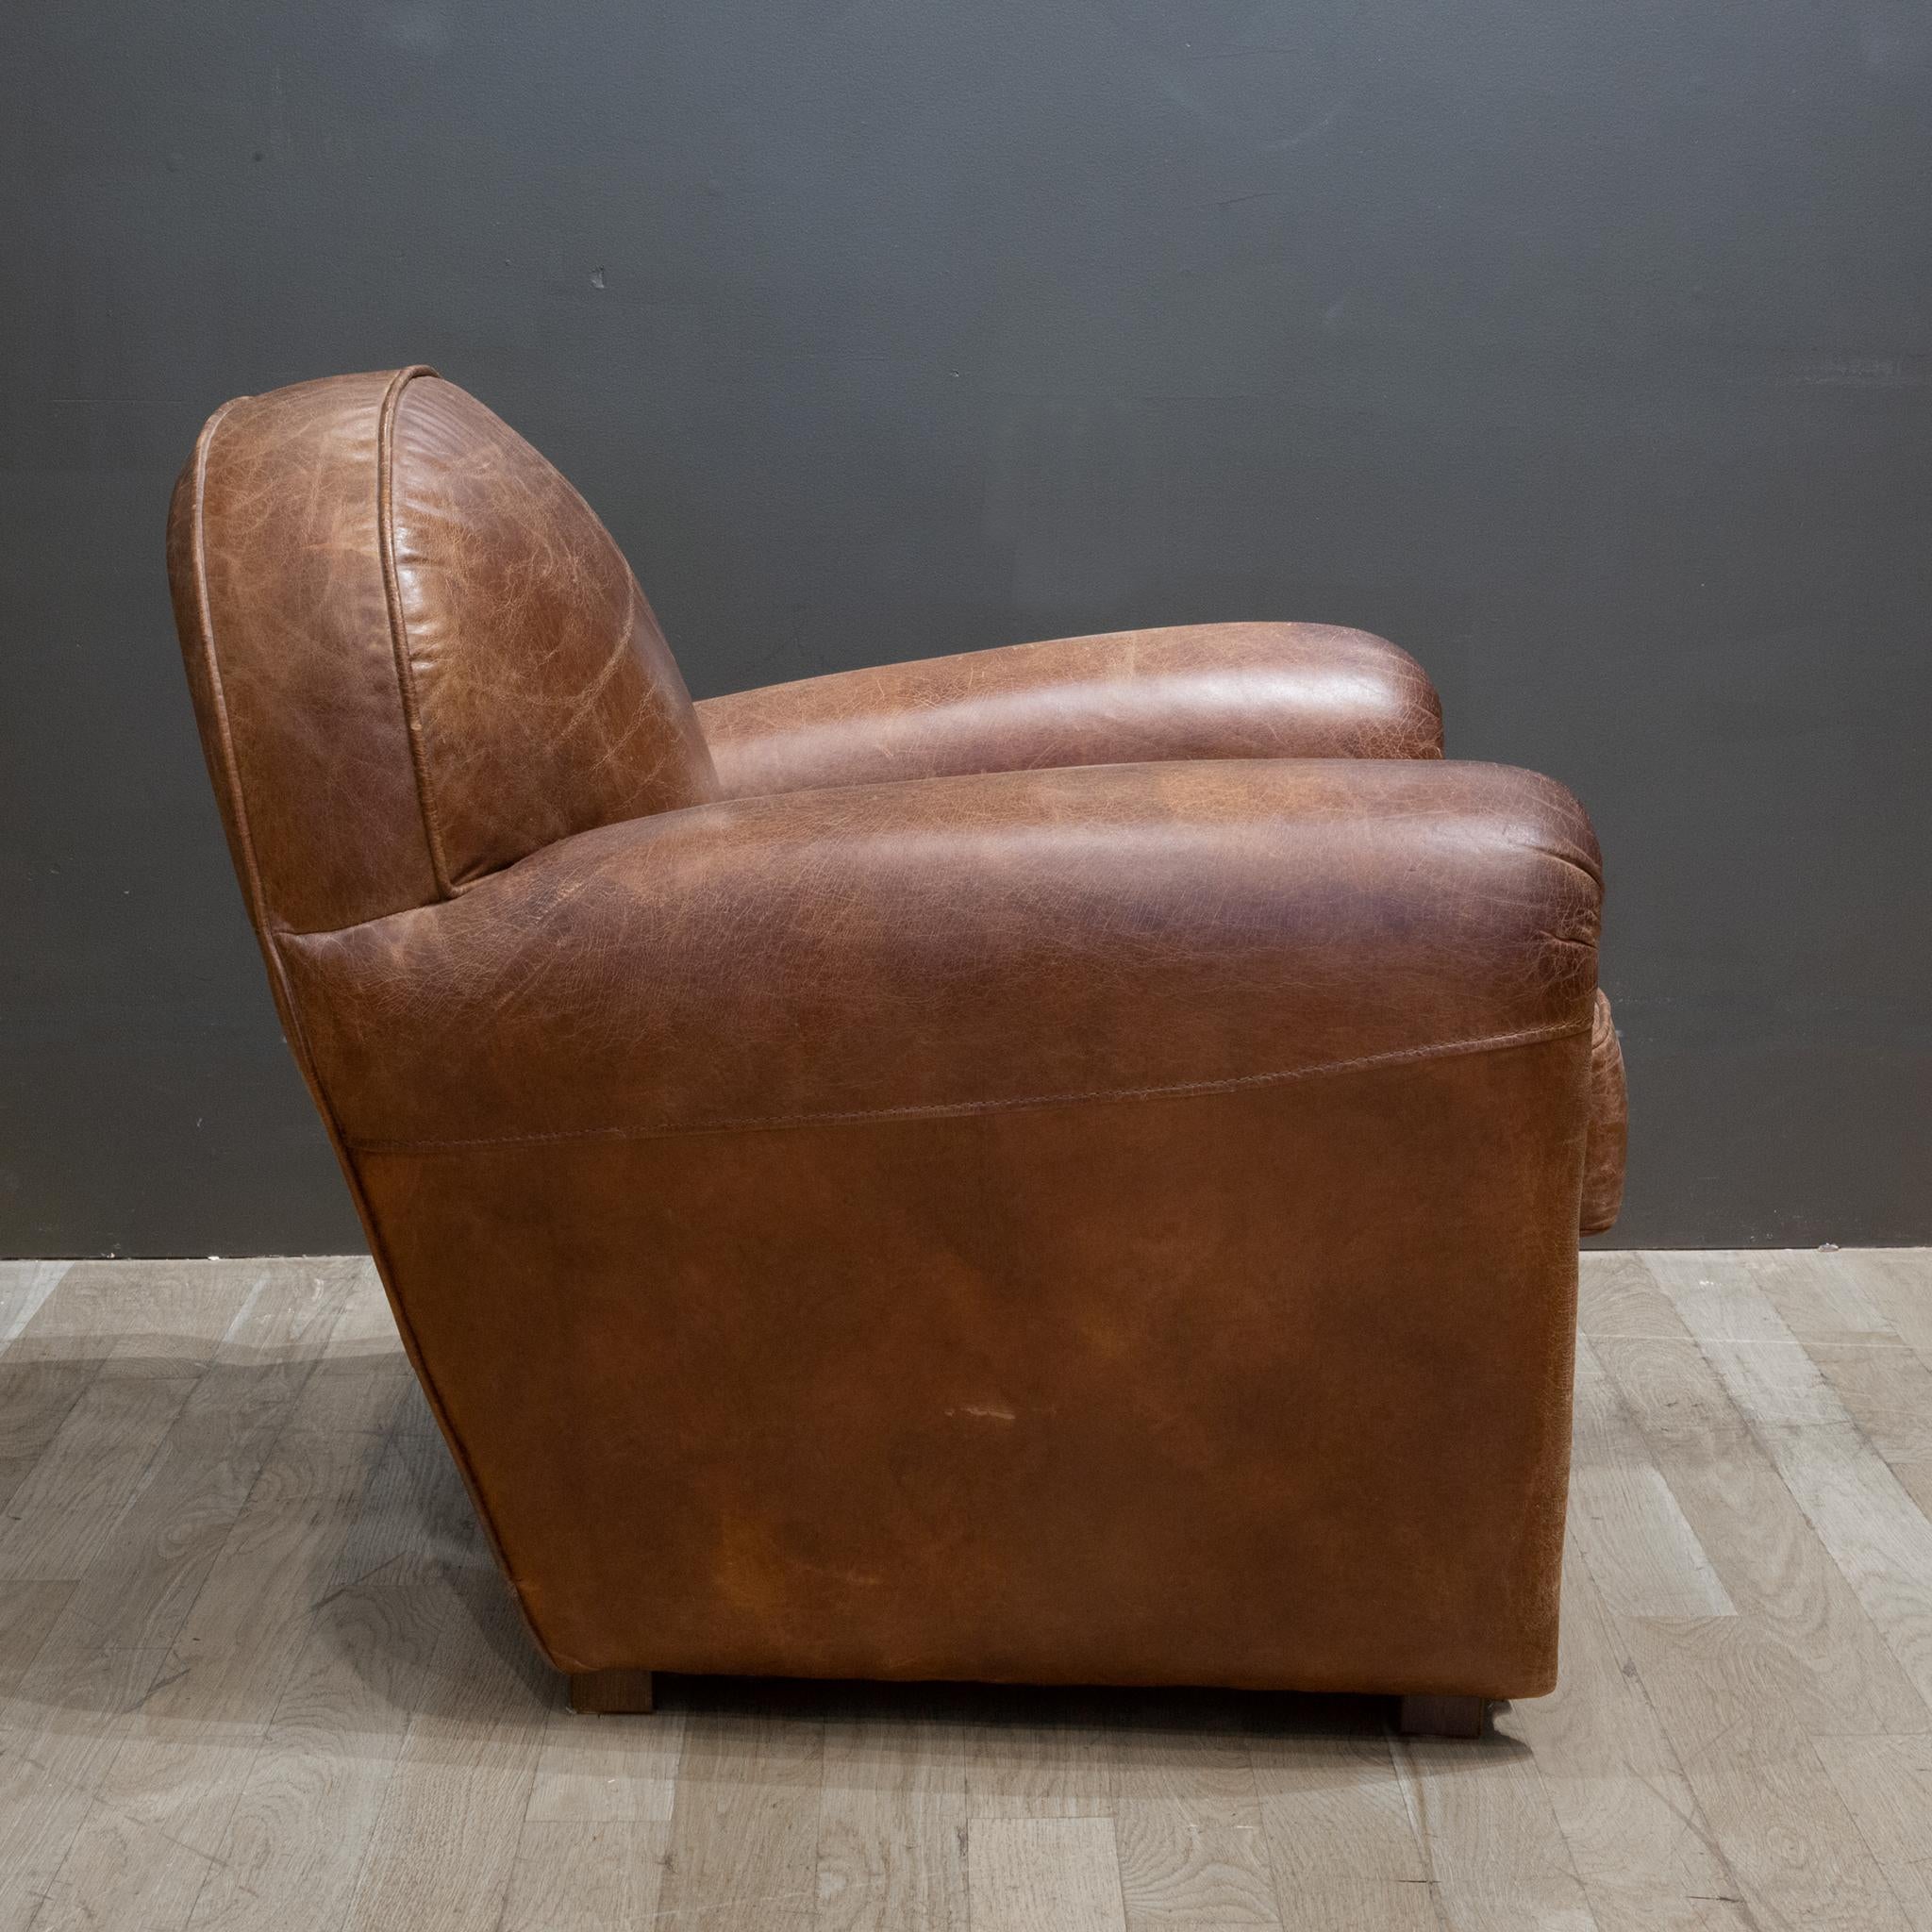 Industrial Timothy Oulton Hand Crafted Leather Club Chair